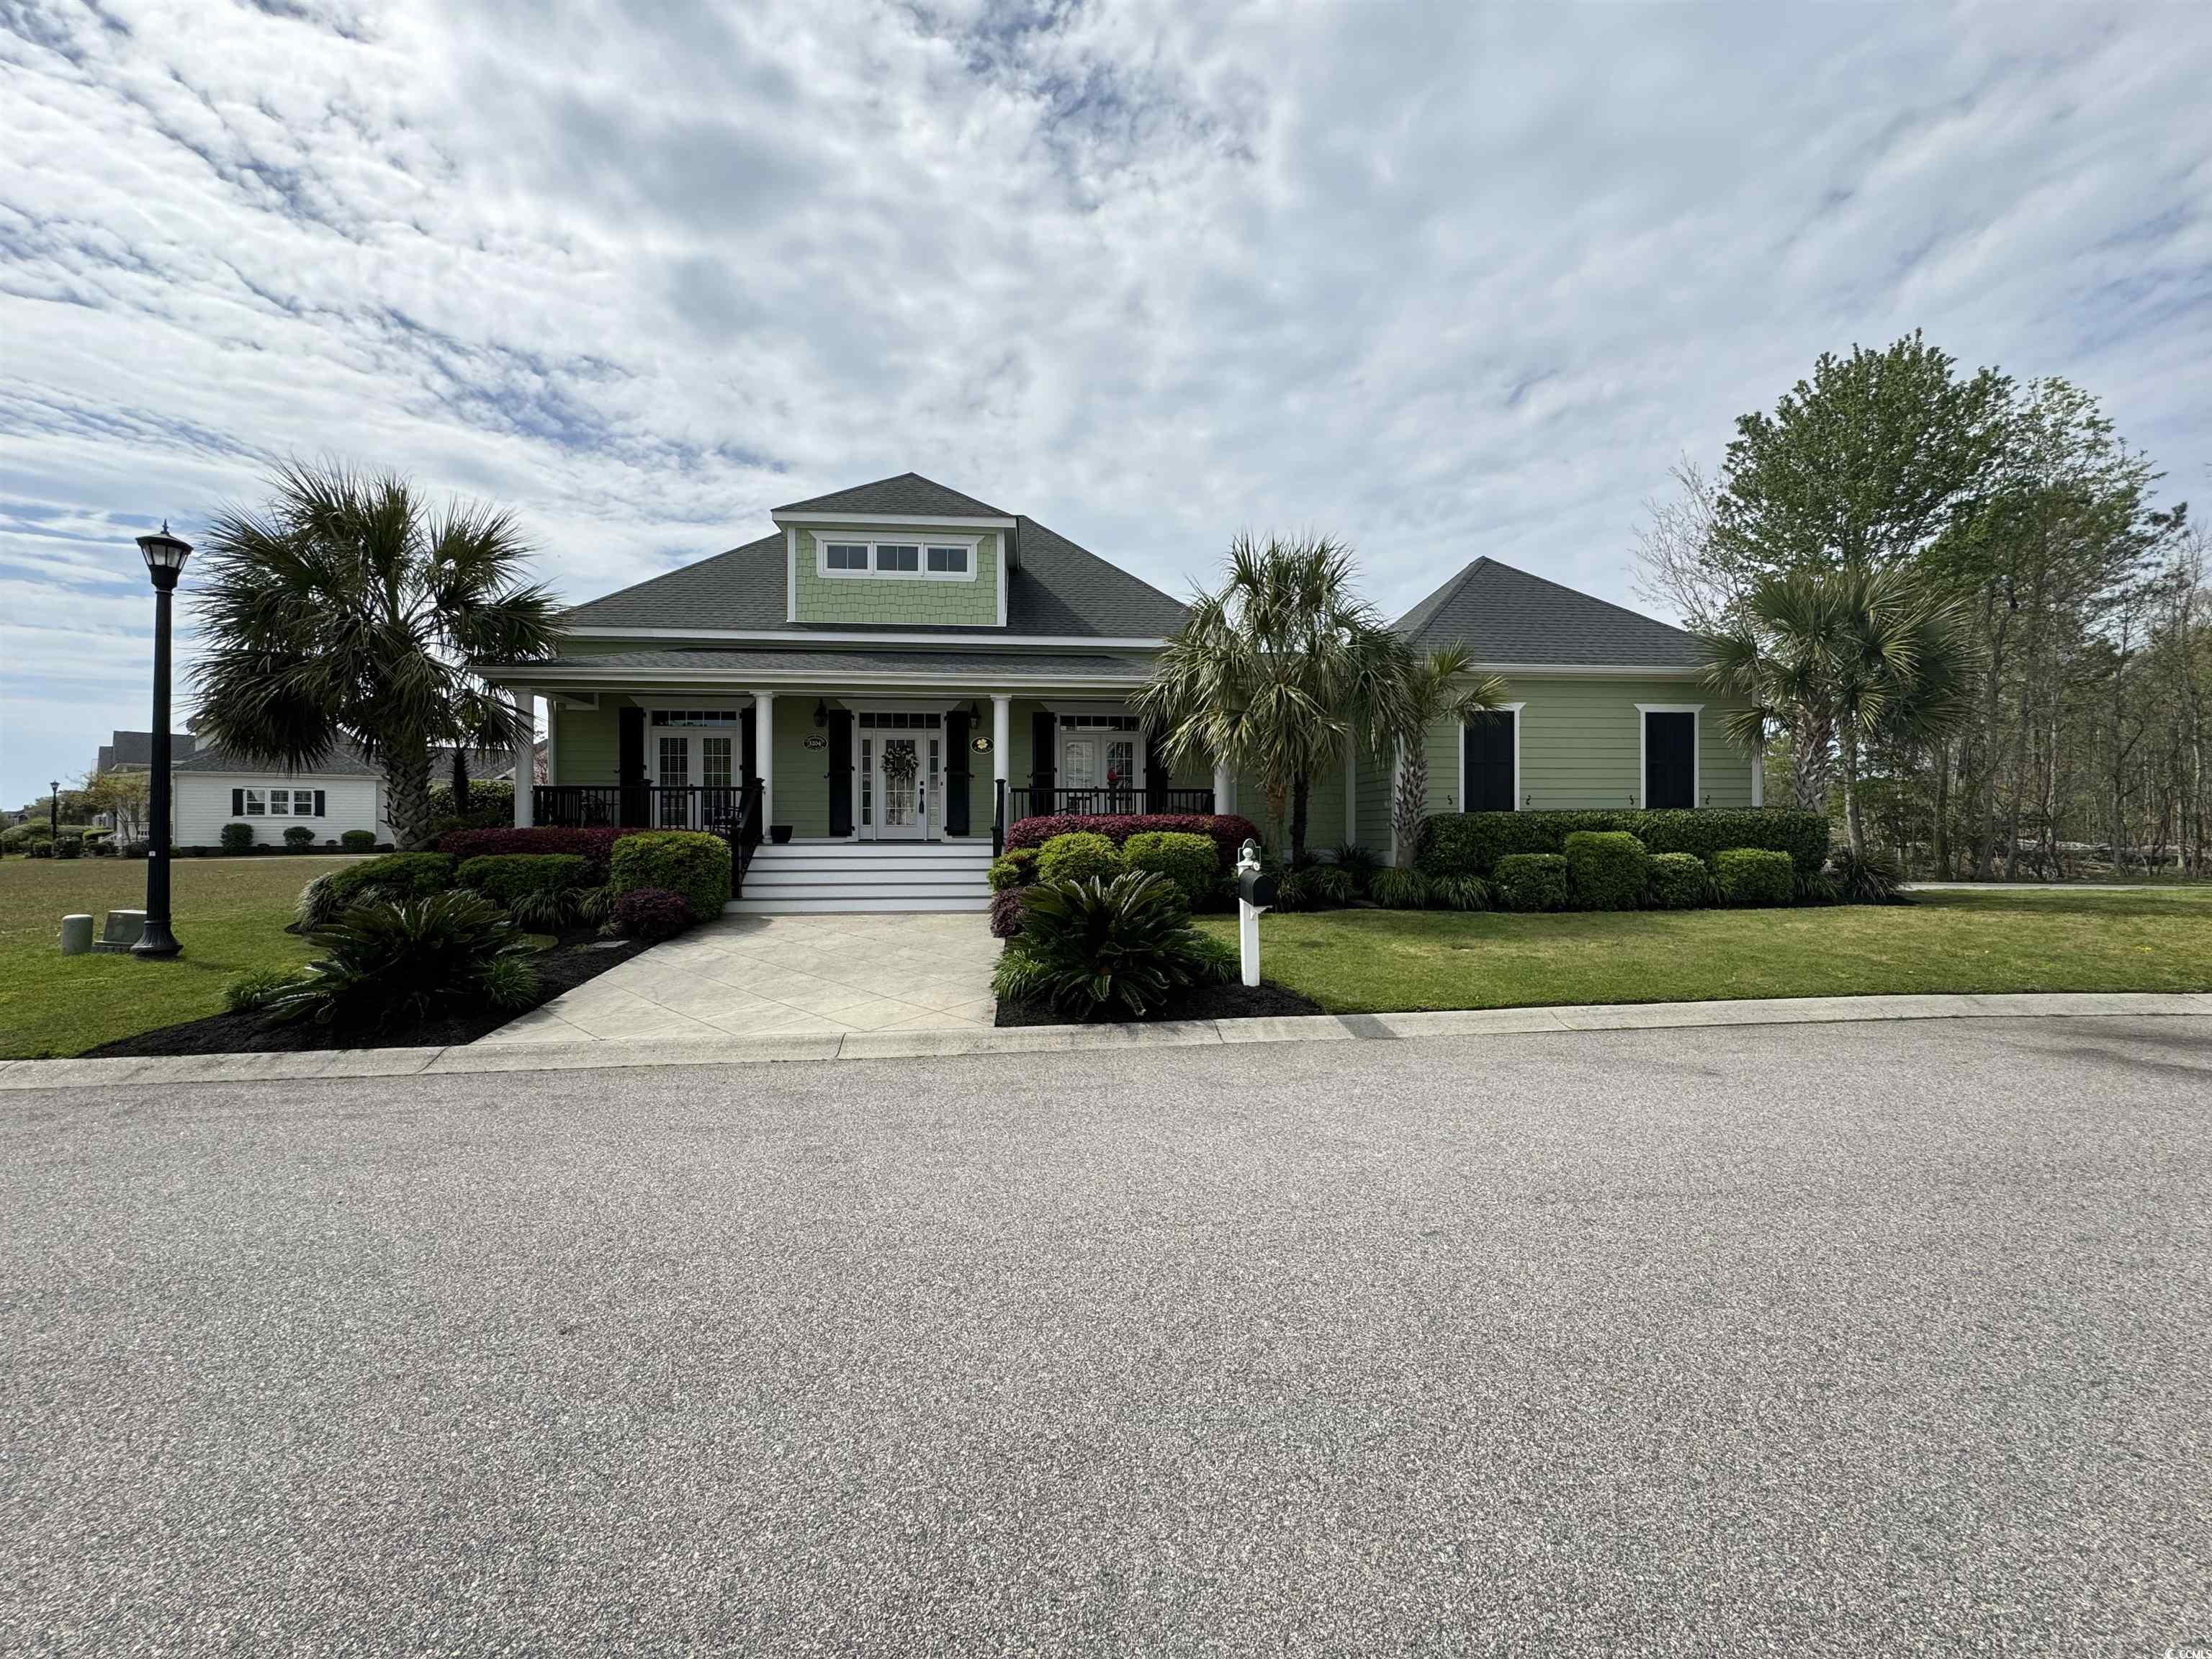 this beautiful home is located in charleston landing only 2 miles from the beach! get one of the fewer homes in charleston landing with a spacious lot. this home features a back patio, as well as, a closed in back porch. the closed in back porch features slide down windows for a cool carolina breeze! the landscape barrier has the backyard feeling like your are in a secluded area all while having the benefits of the neighborhood amenities. once you walk into the front door you have 2 masters on each side of the house with access from each bedroom onto the front porch. the kitchen features granite countertops, with all cabinets accessible for storage, and a spacious pantry. the downstairs laundry room/mud room is accessible from the garage. the upstairs has 2 bedrooms and a shared bathroom, and 2 separate storage areas. don't let the adjacent construction divert you. a greenway barrier will be put up to keep the privacy of each neighborhood! don't miss out on this charleston living in a great community!